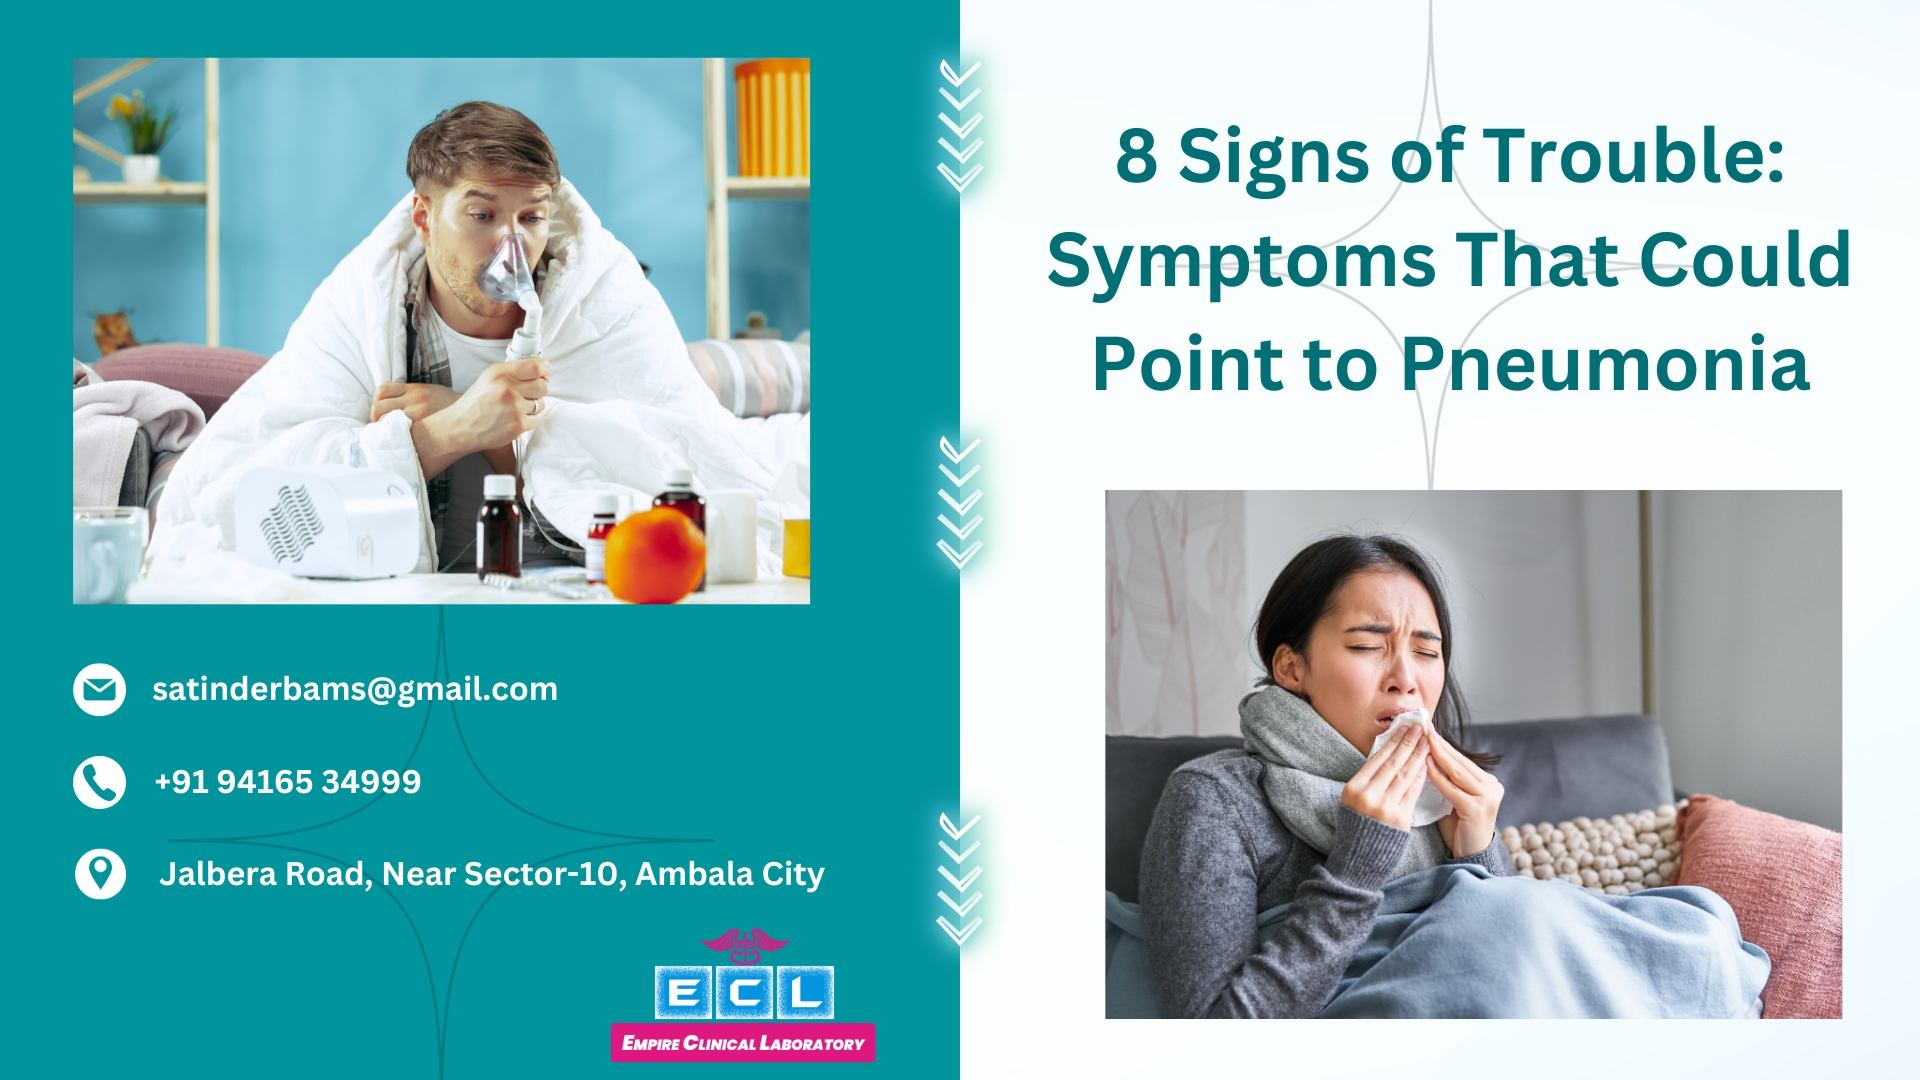 8-signs-of-trouble-symptoms-that-could-point-to-pneumonia